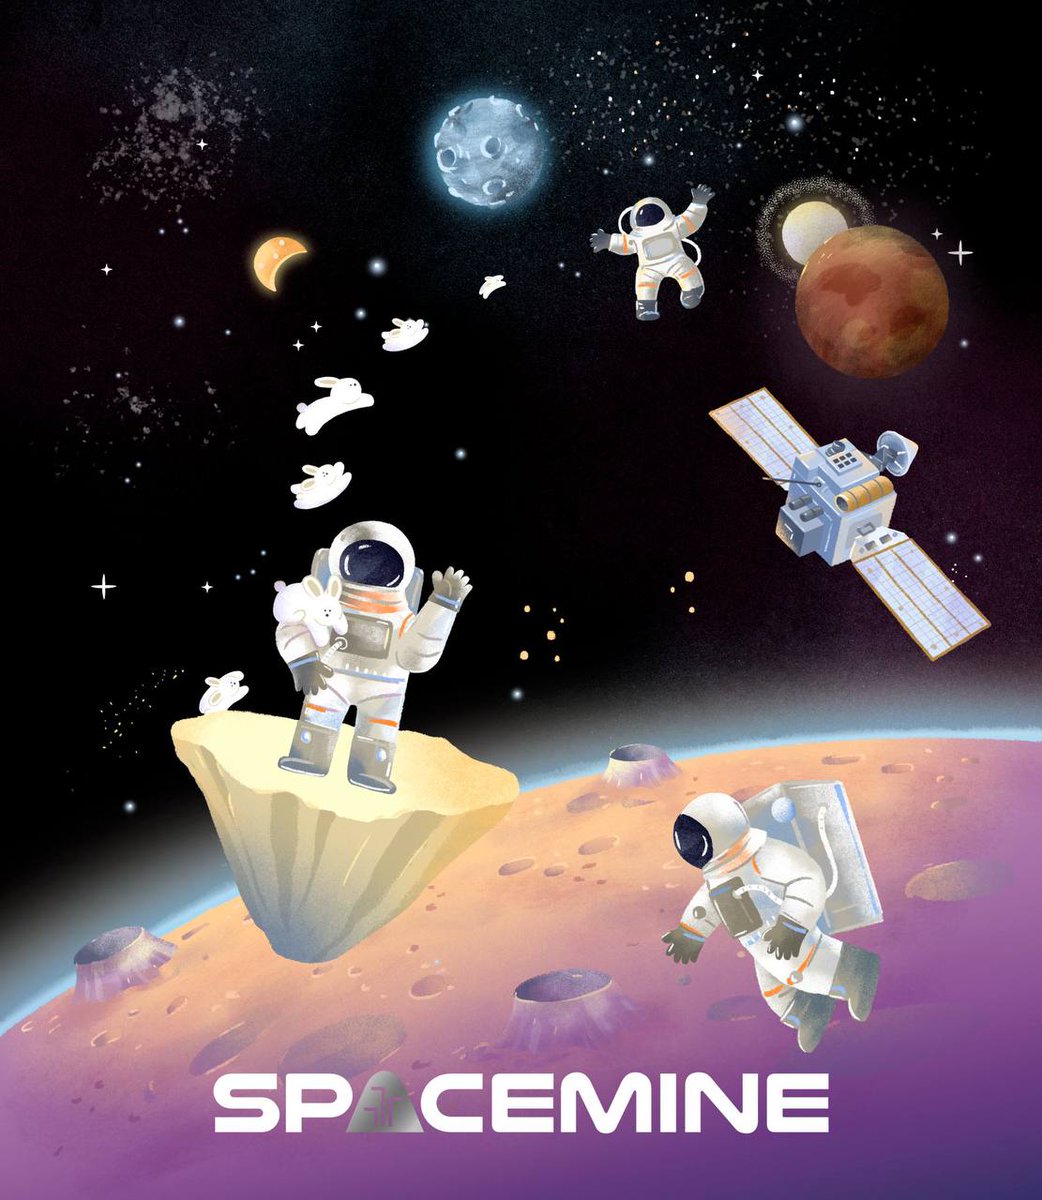 Dive deep into the world of decentralized finance with #SpaceMine's comprehensive ecosystem! 🌊 #DeFi #CryptocurrencyTrading